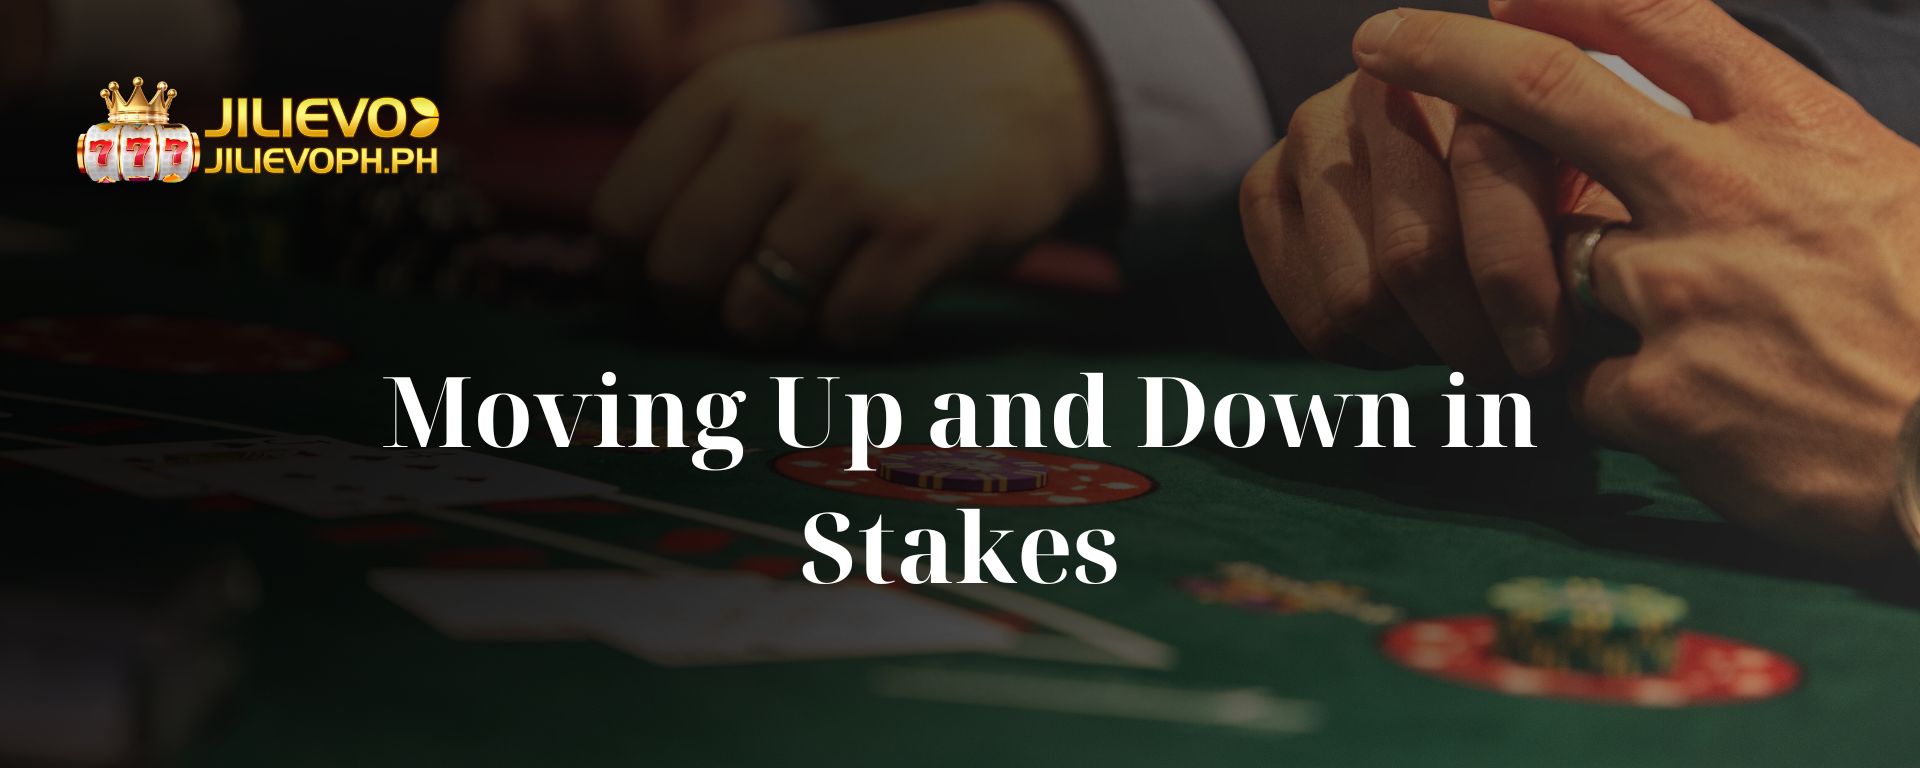 Moving Up and Down in Stakes